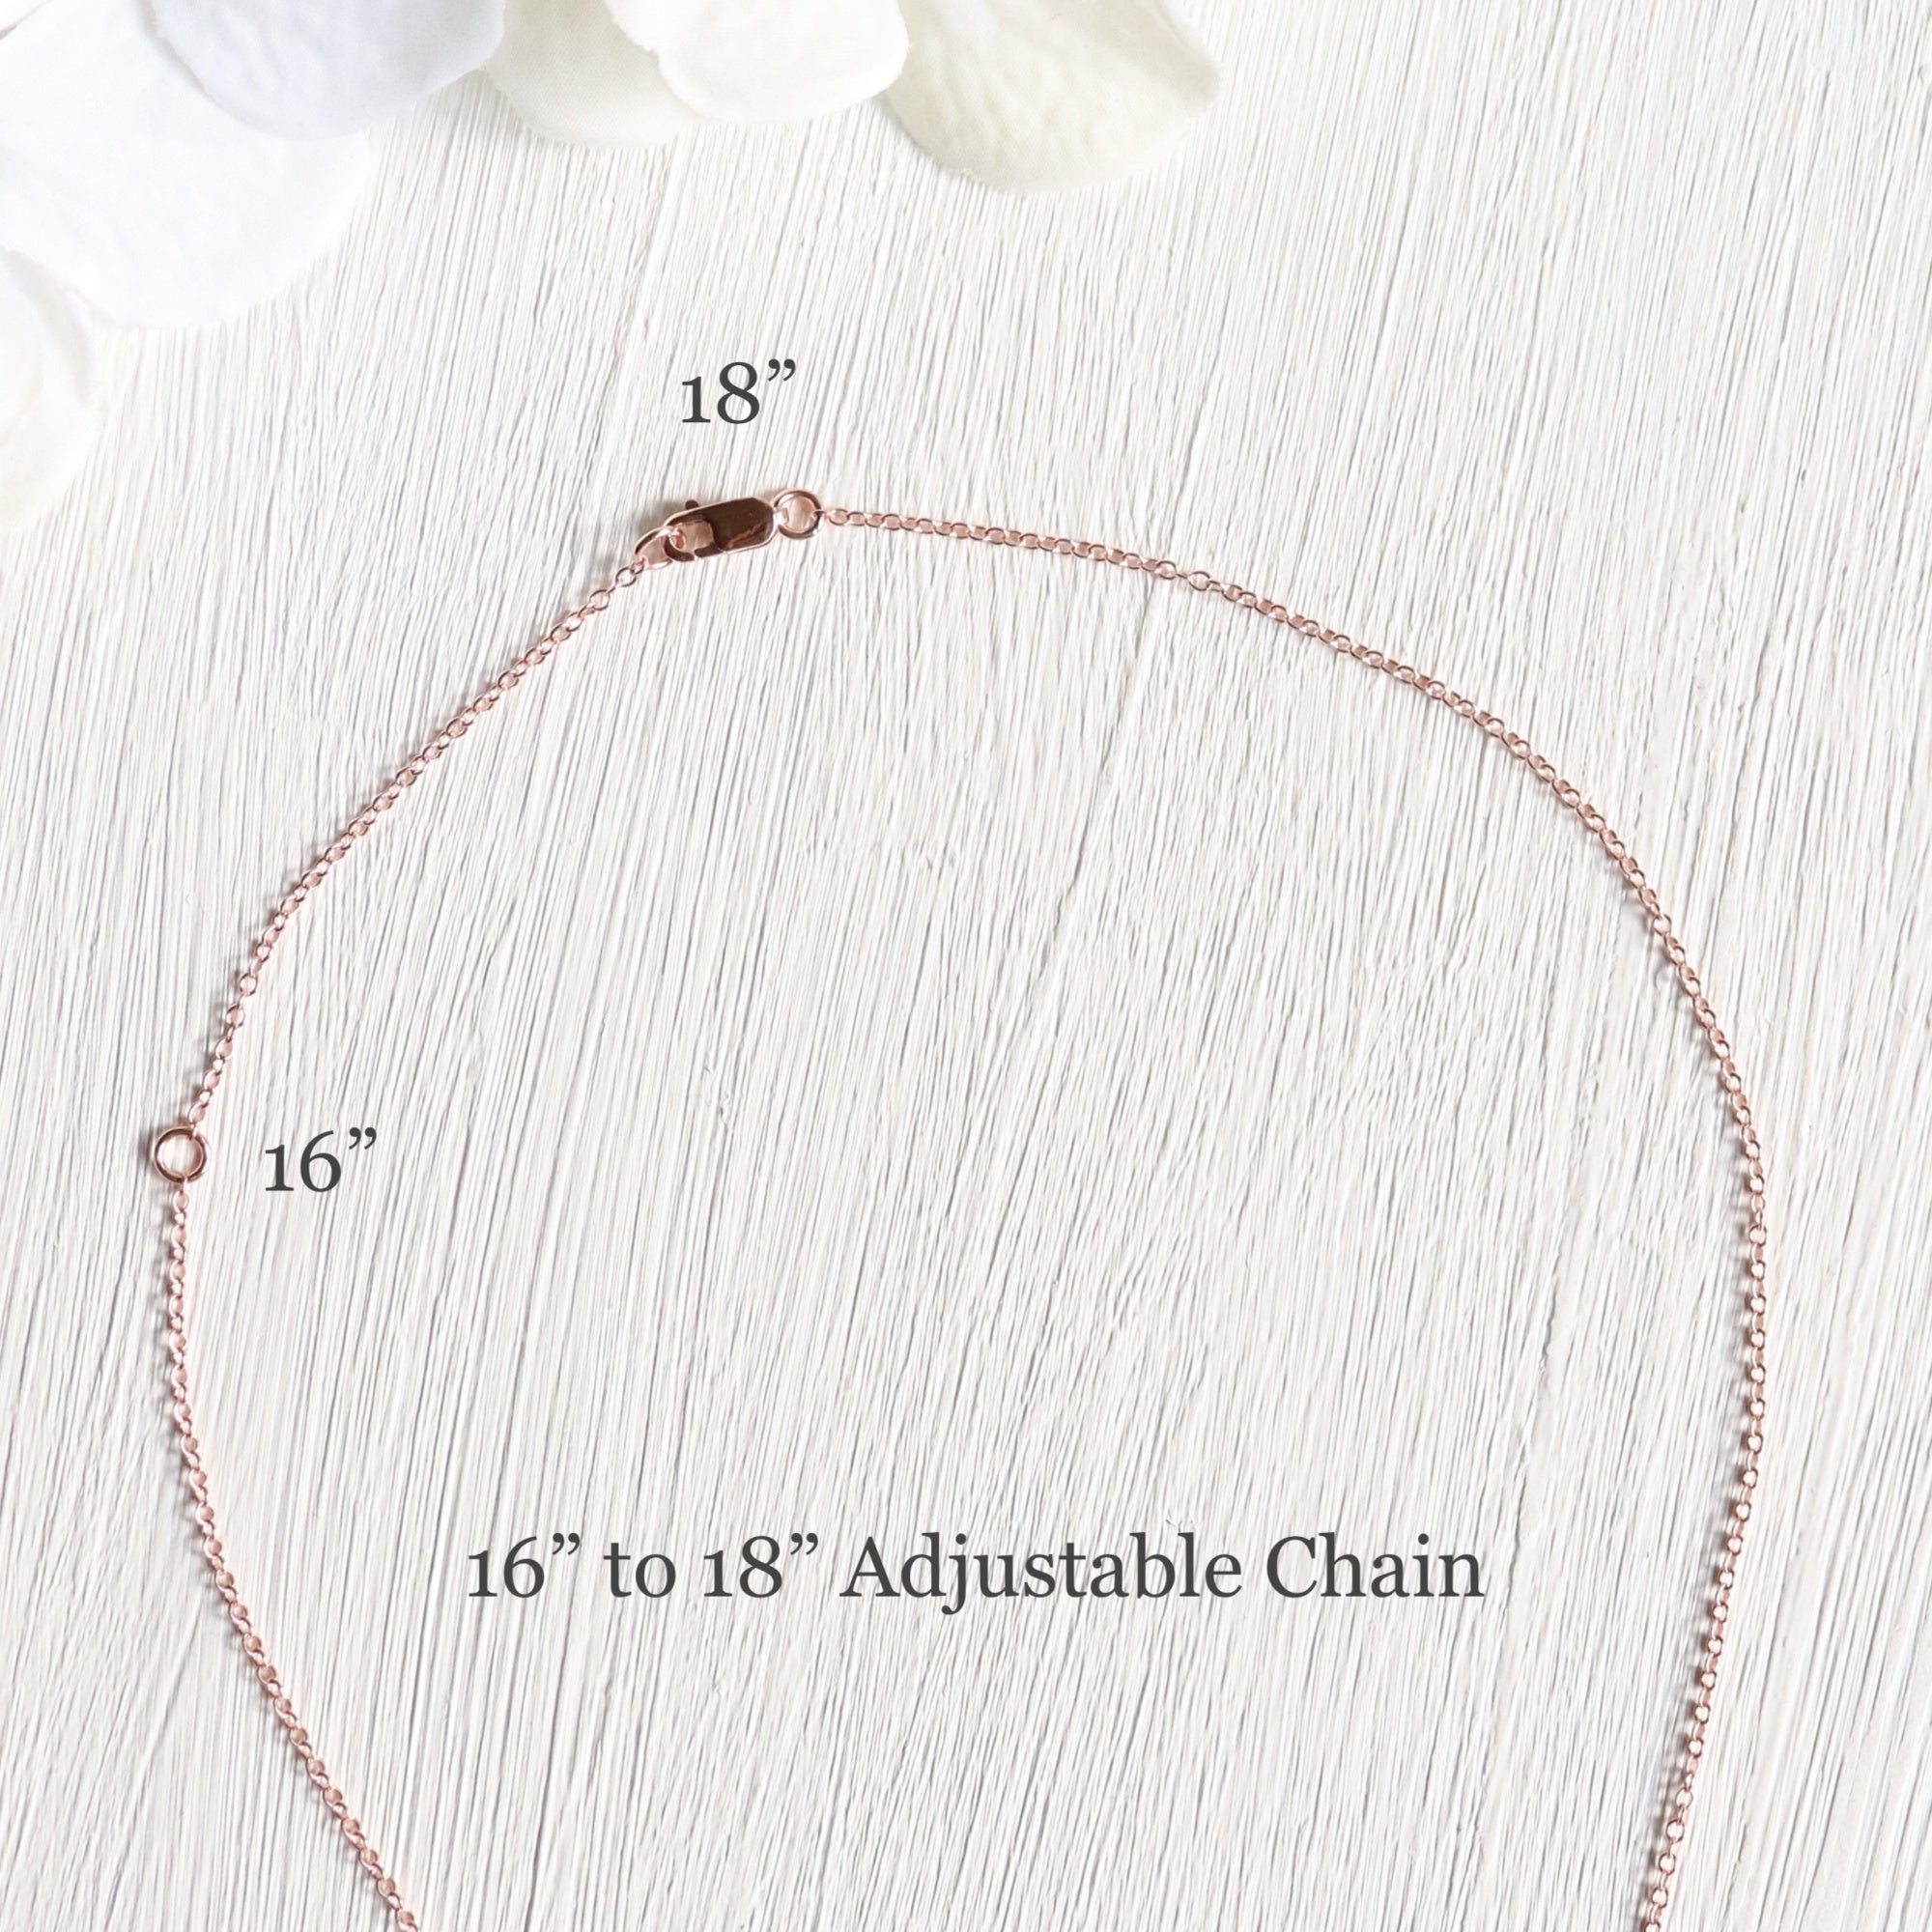 16” to 18" Adjustable Gold Chain Necklace La More Design Jewelry